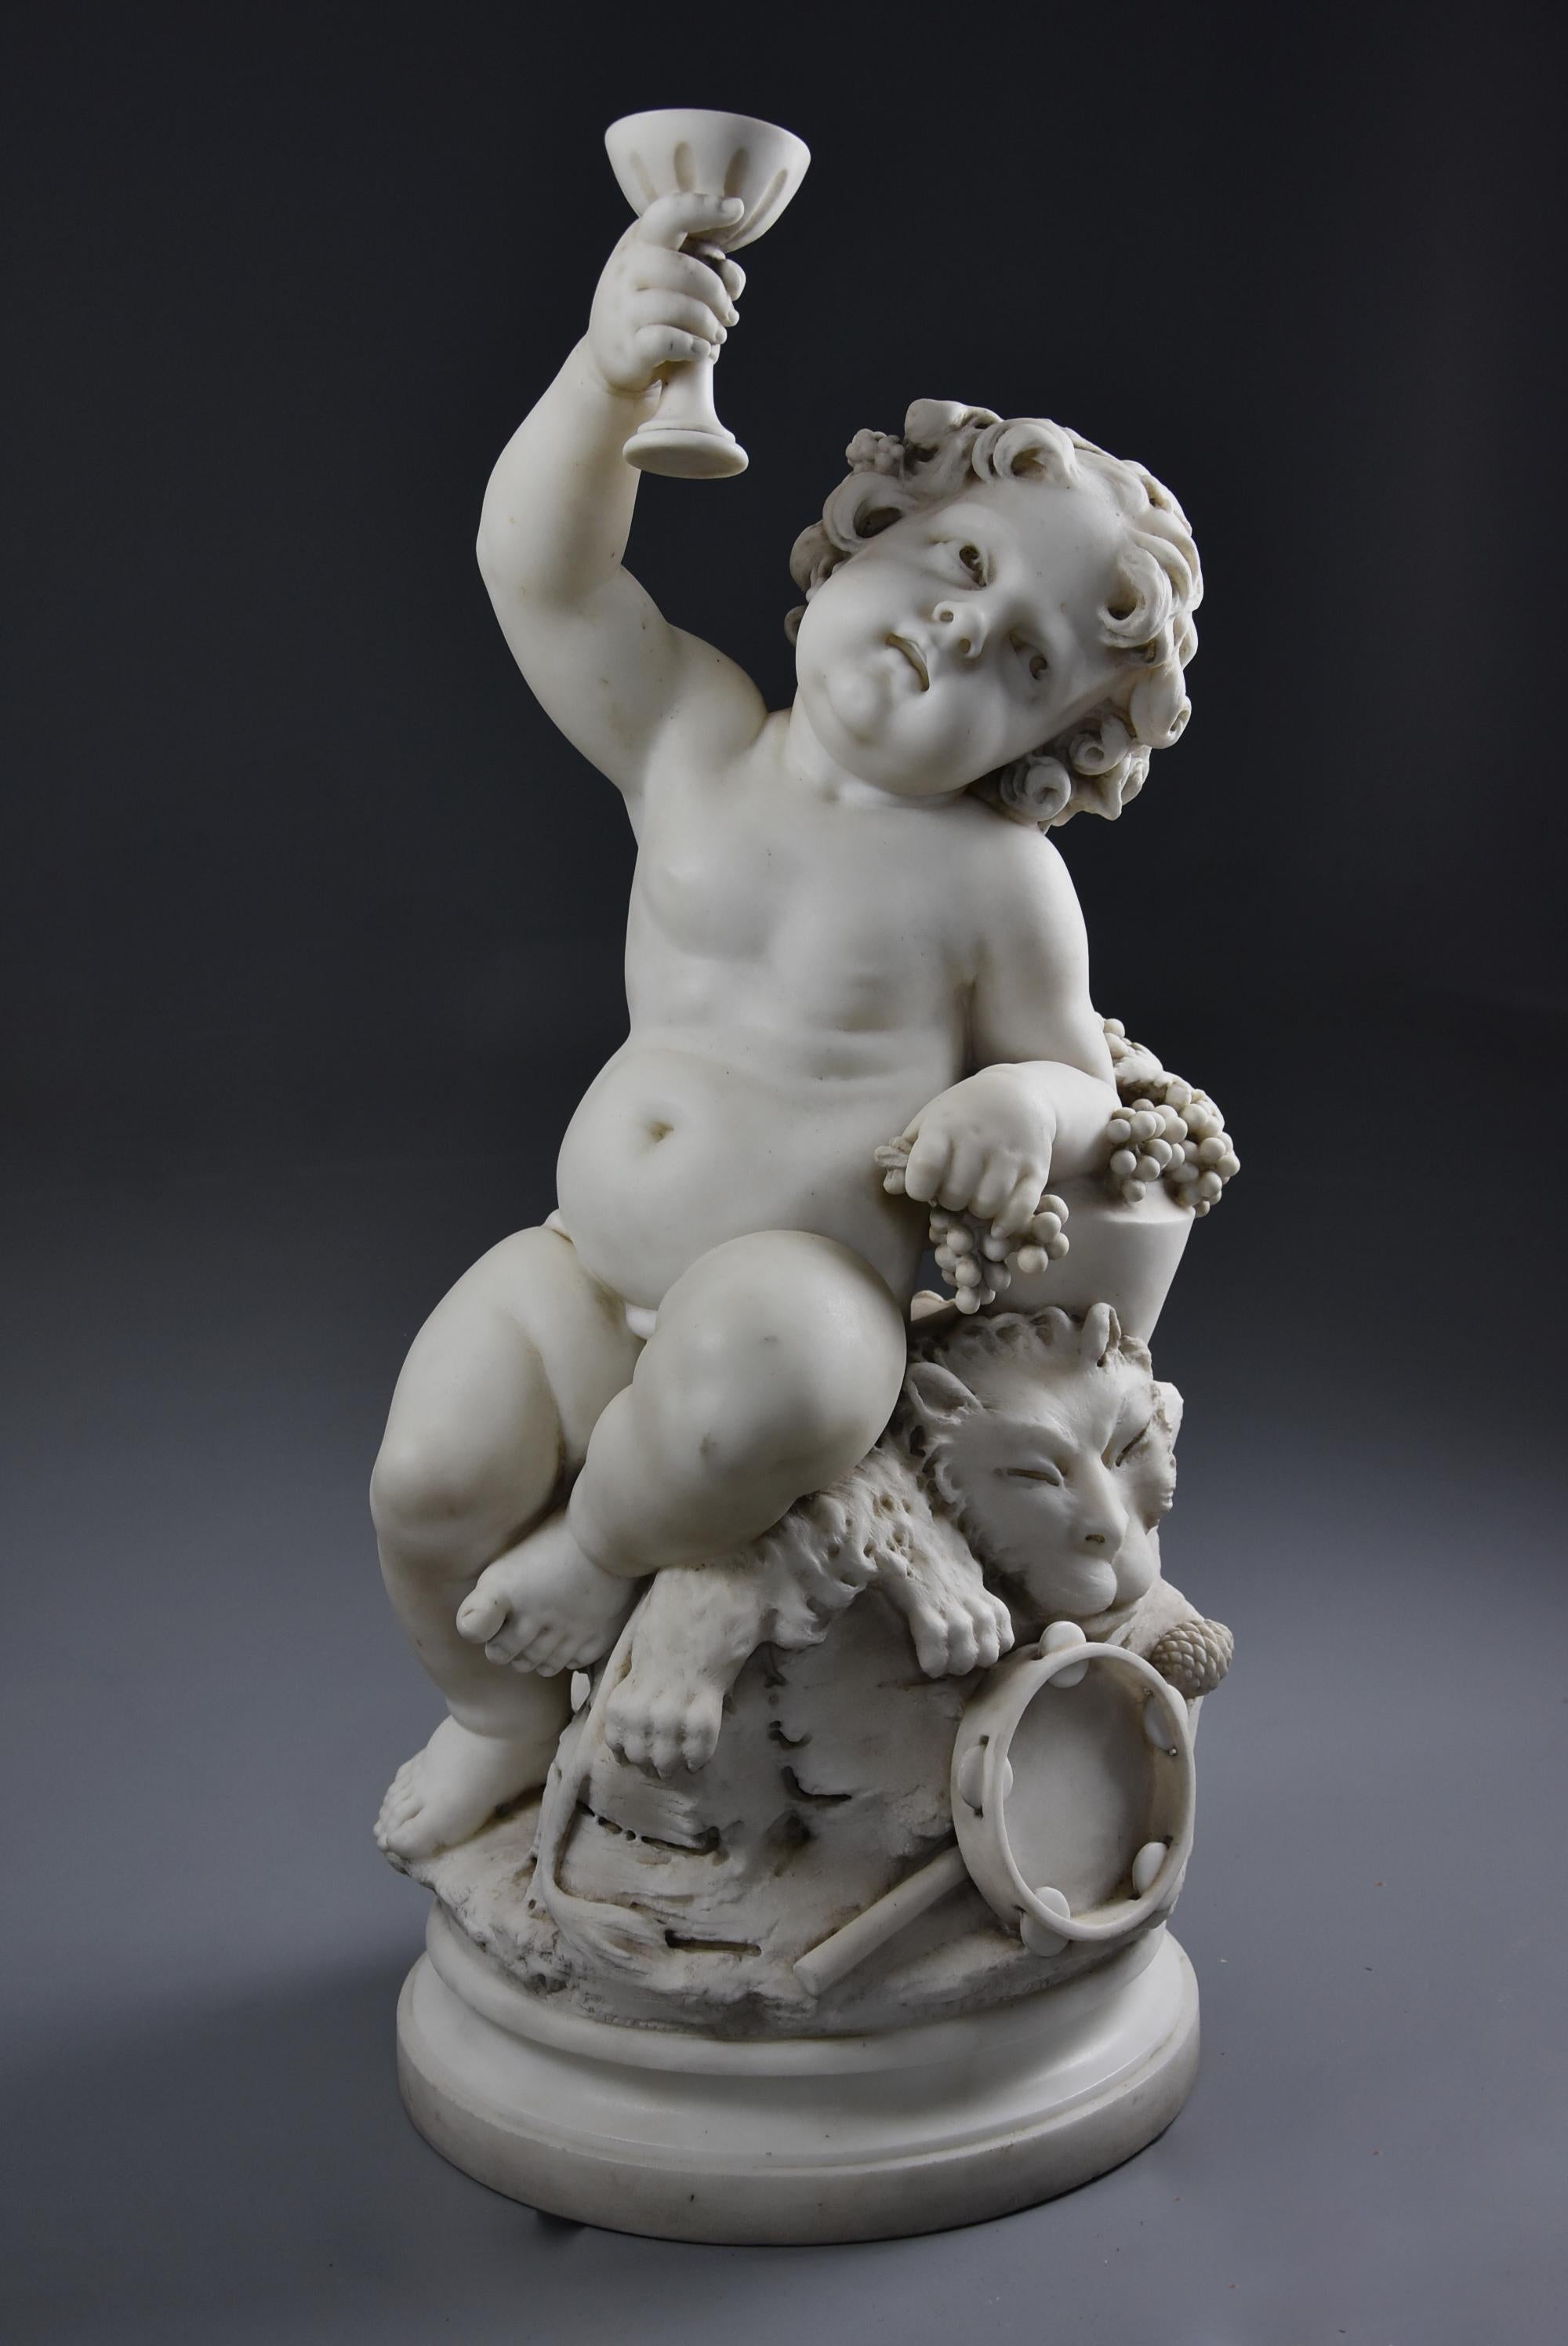 A fine quality late 19th century Italian Carrara marble sculpture of ‘Young Dionysus’ (or Bacchus) signed Aristide Fontana.

The infant is seated on a naturalistic base, holding a goblet in his right hand with grapes, a lion skin, thyrsos (pine